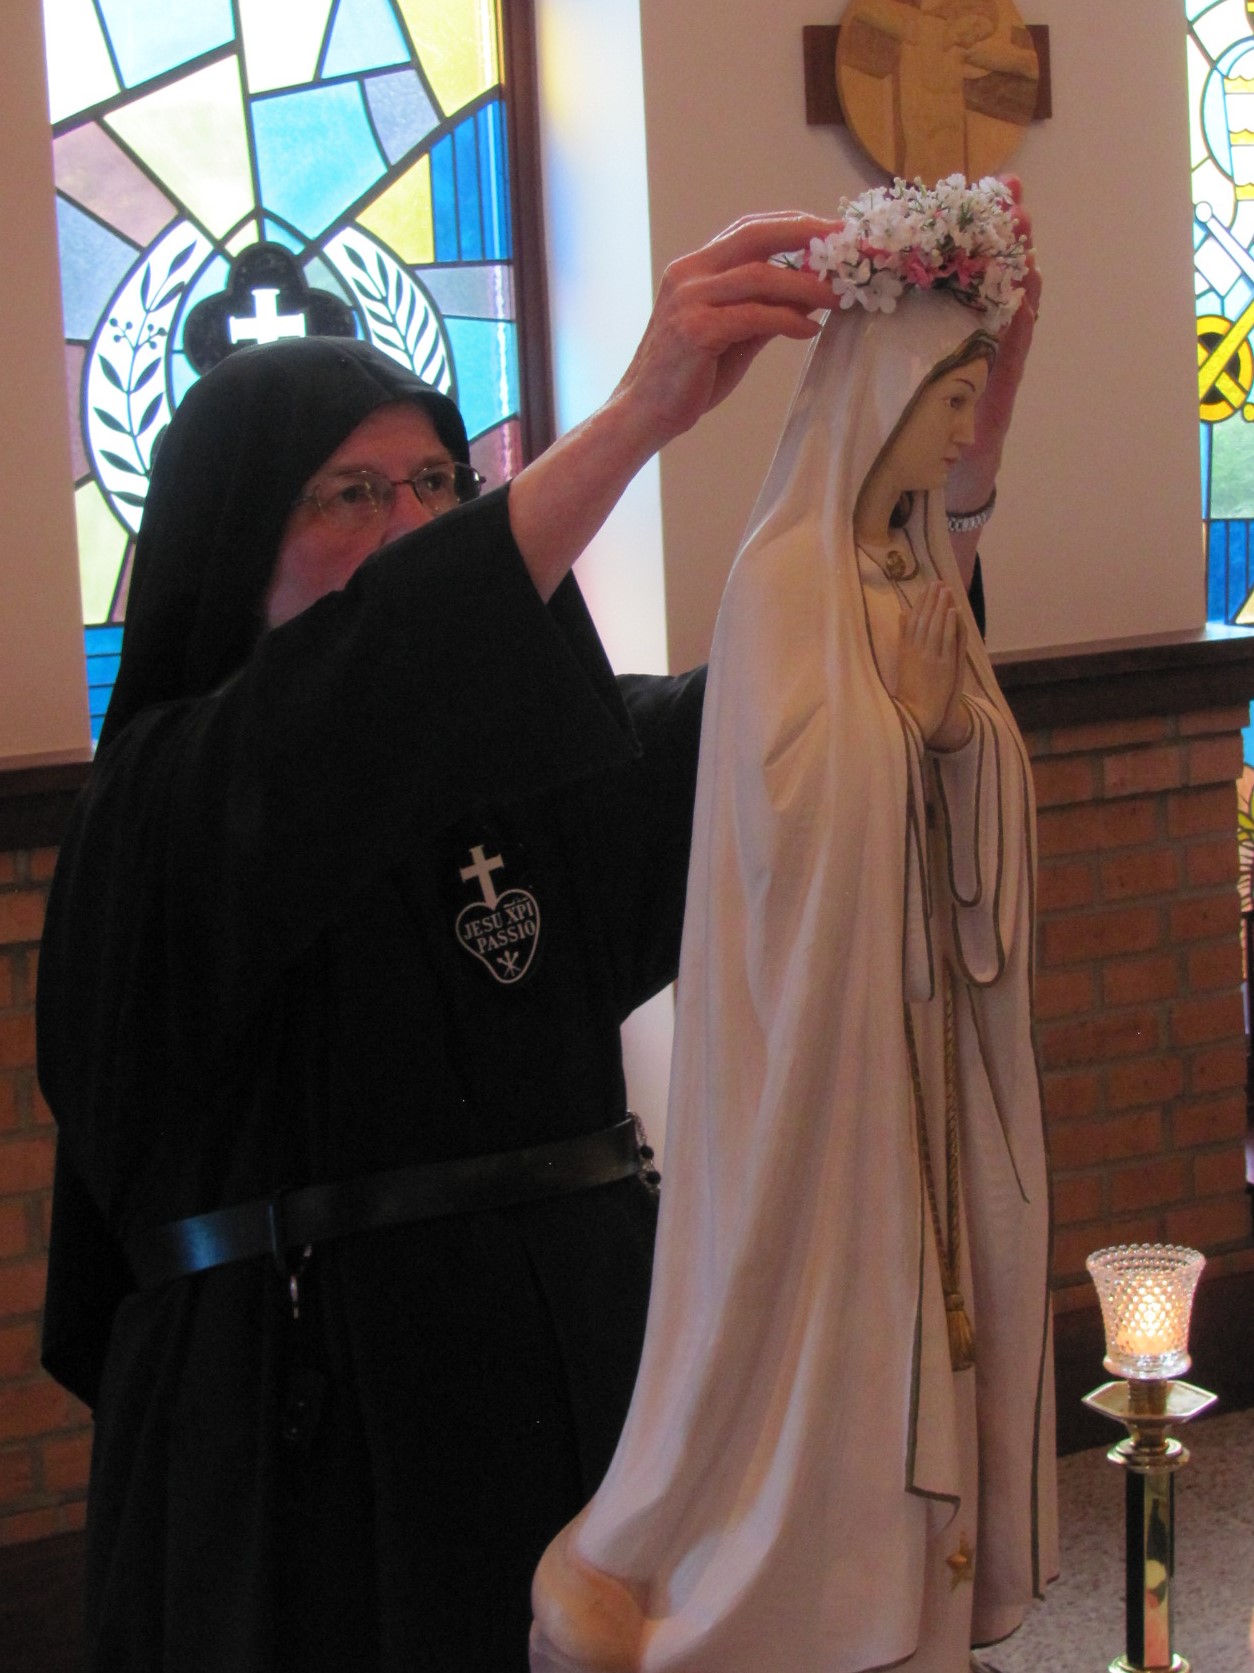  Sr. Mary Agnes crowns Our Lady of Fatima near the sanctuary in the chapel 